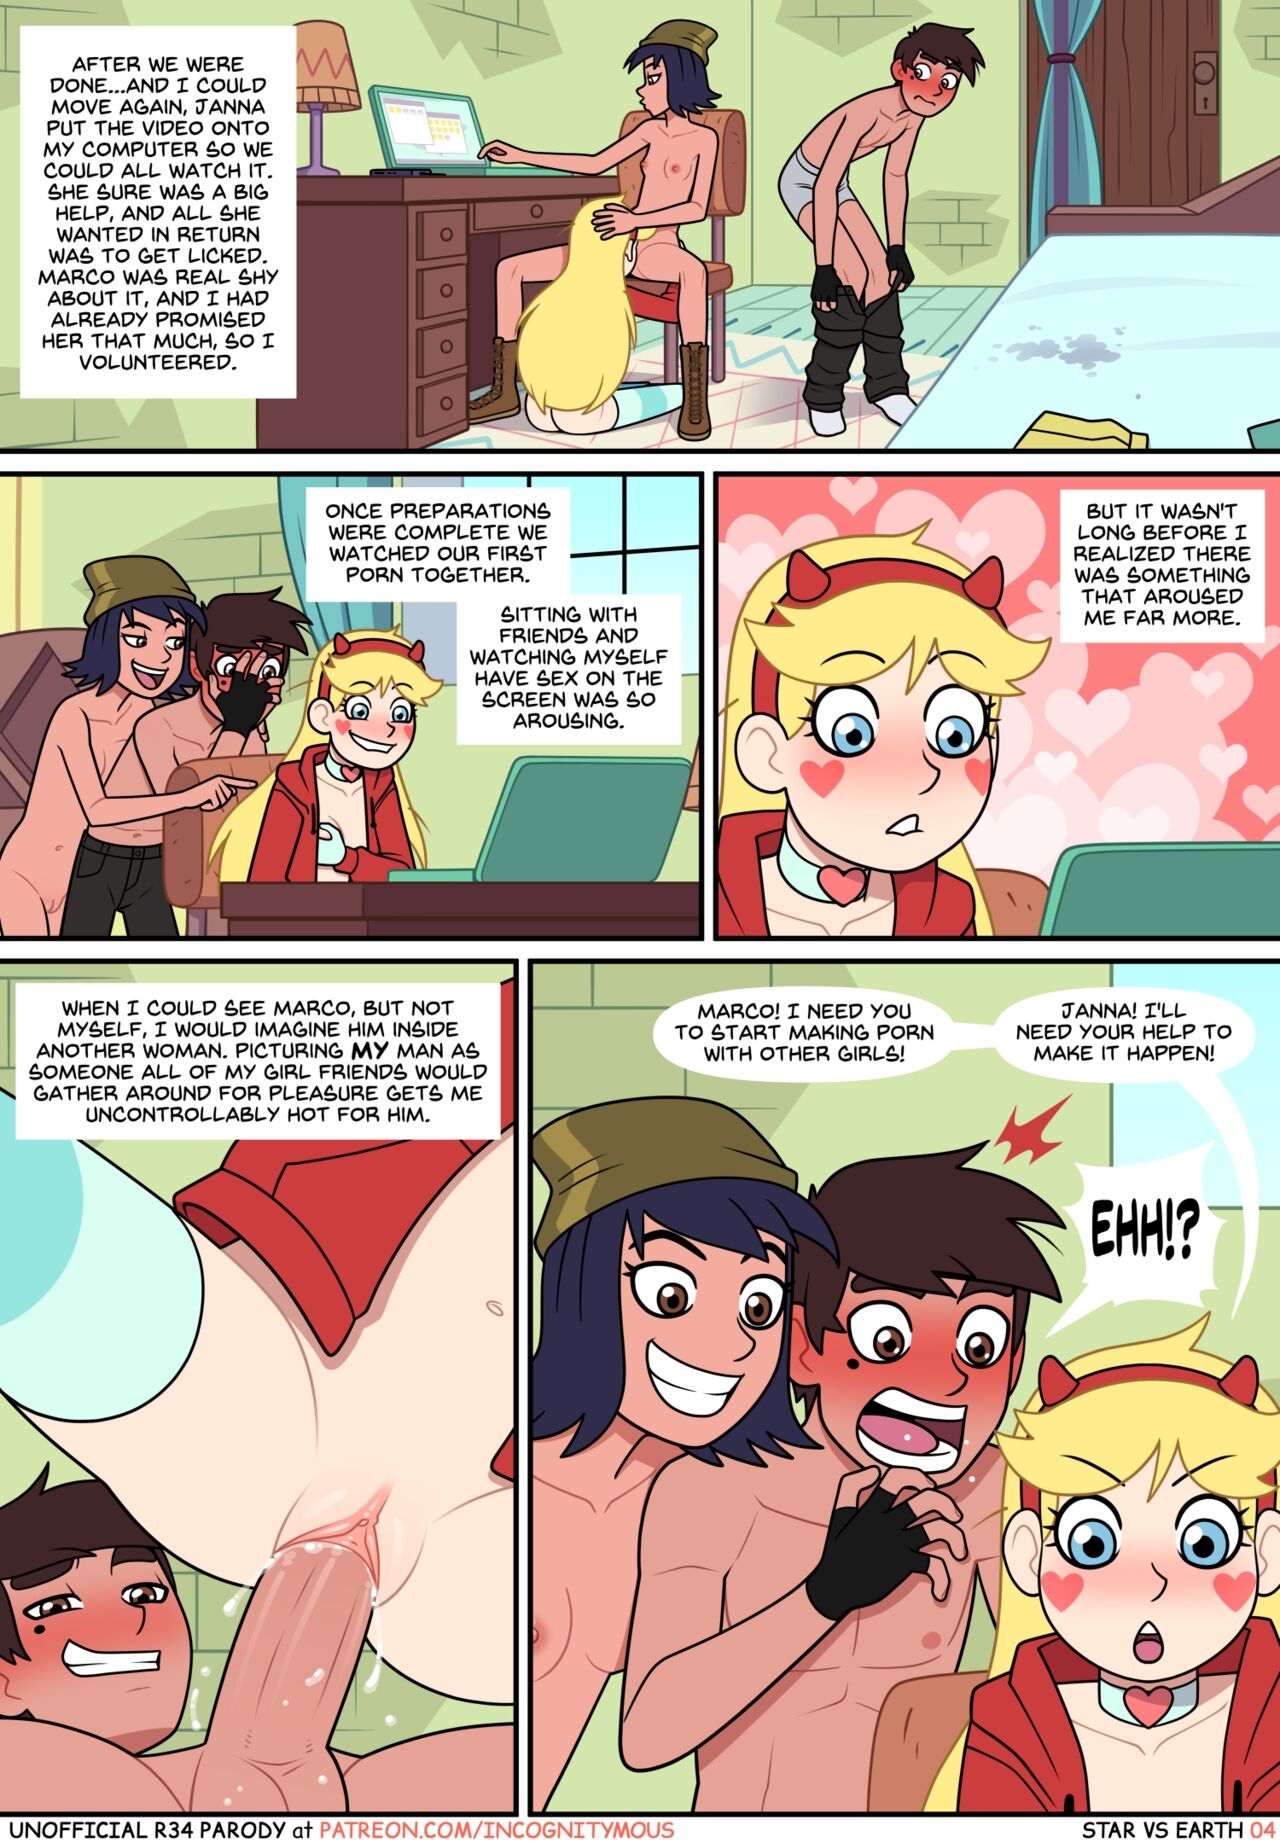 (Incognitymous)Star vs the Forces of Evil - Star vs Earth(ongoing) 3